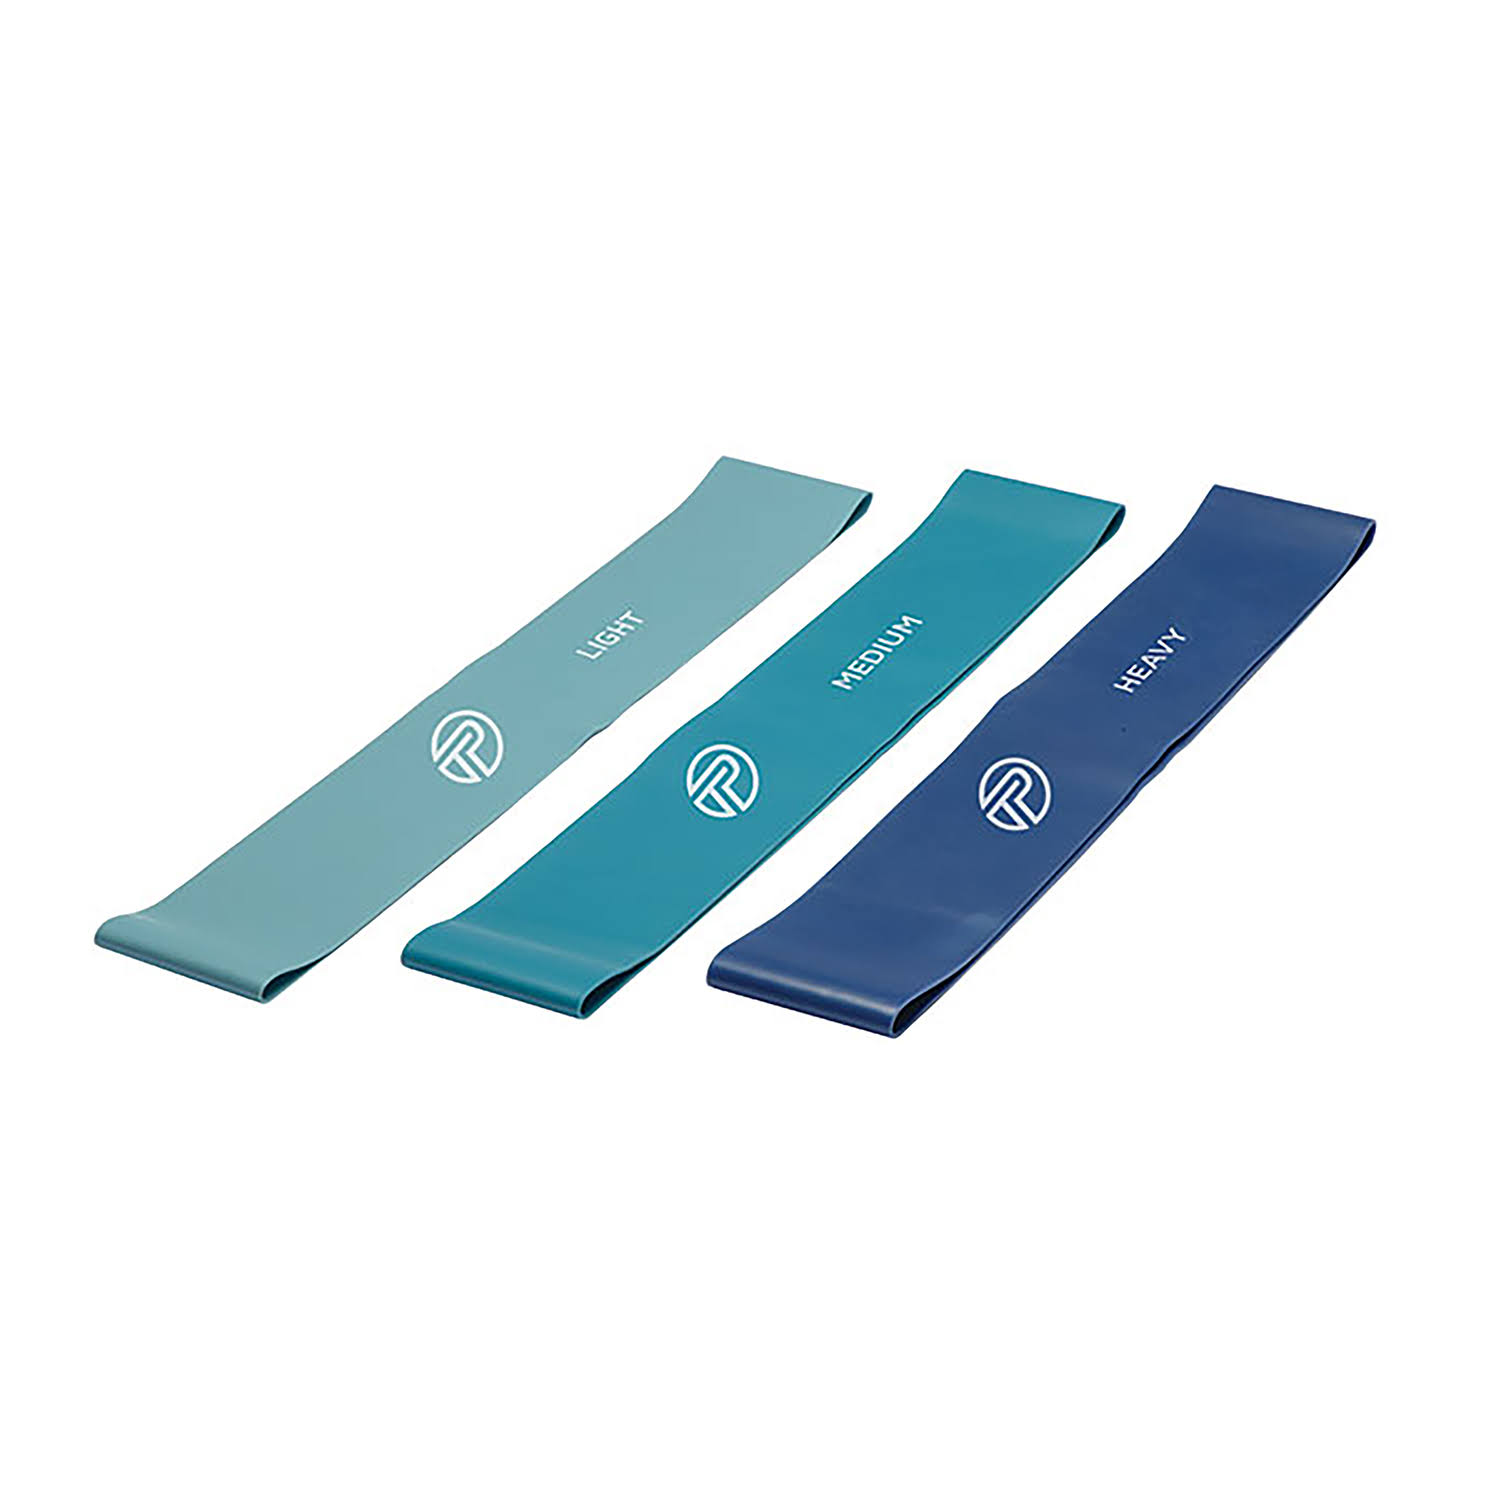 Pro-tec resistance bands (pack of 3)